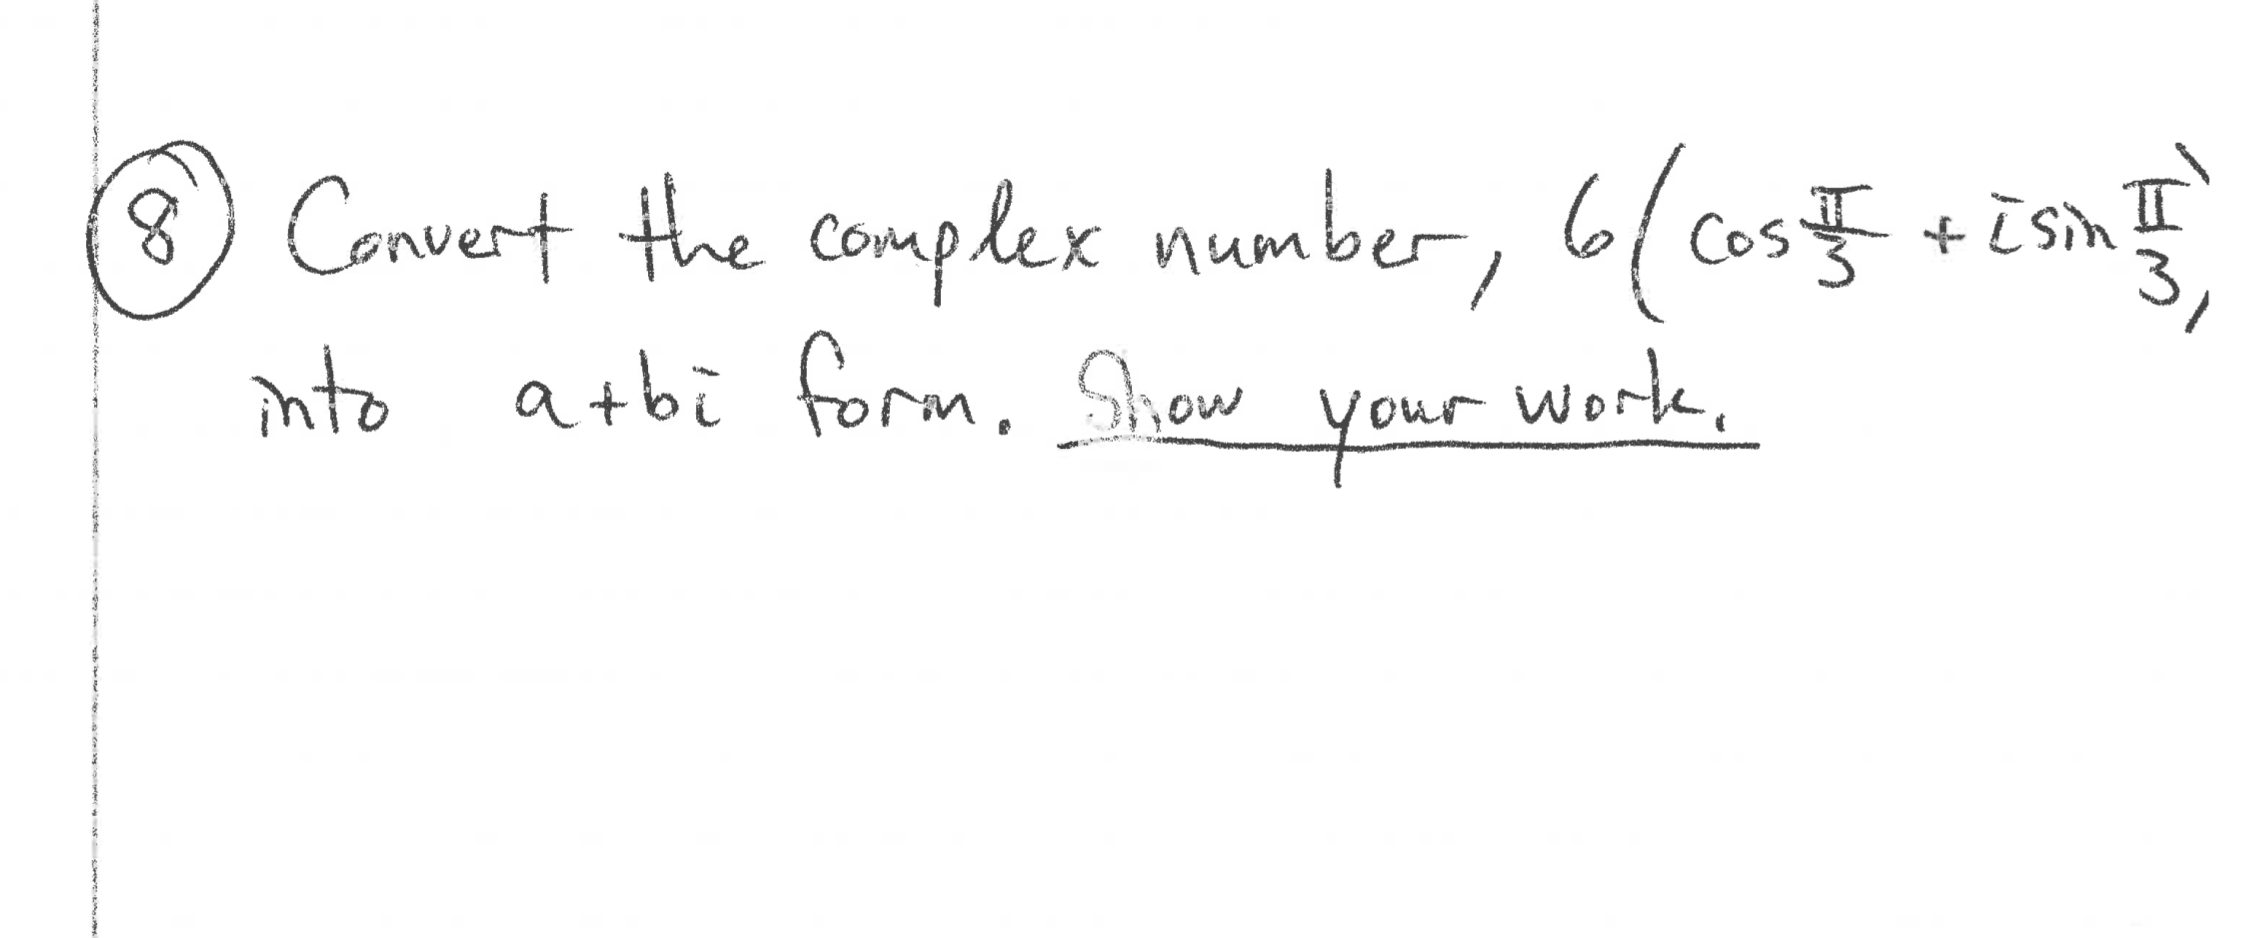 Convert the complex number, 6las aism
Cos पु. + tSh
i sin II
into atbi form, Show
Work,
your
